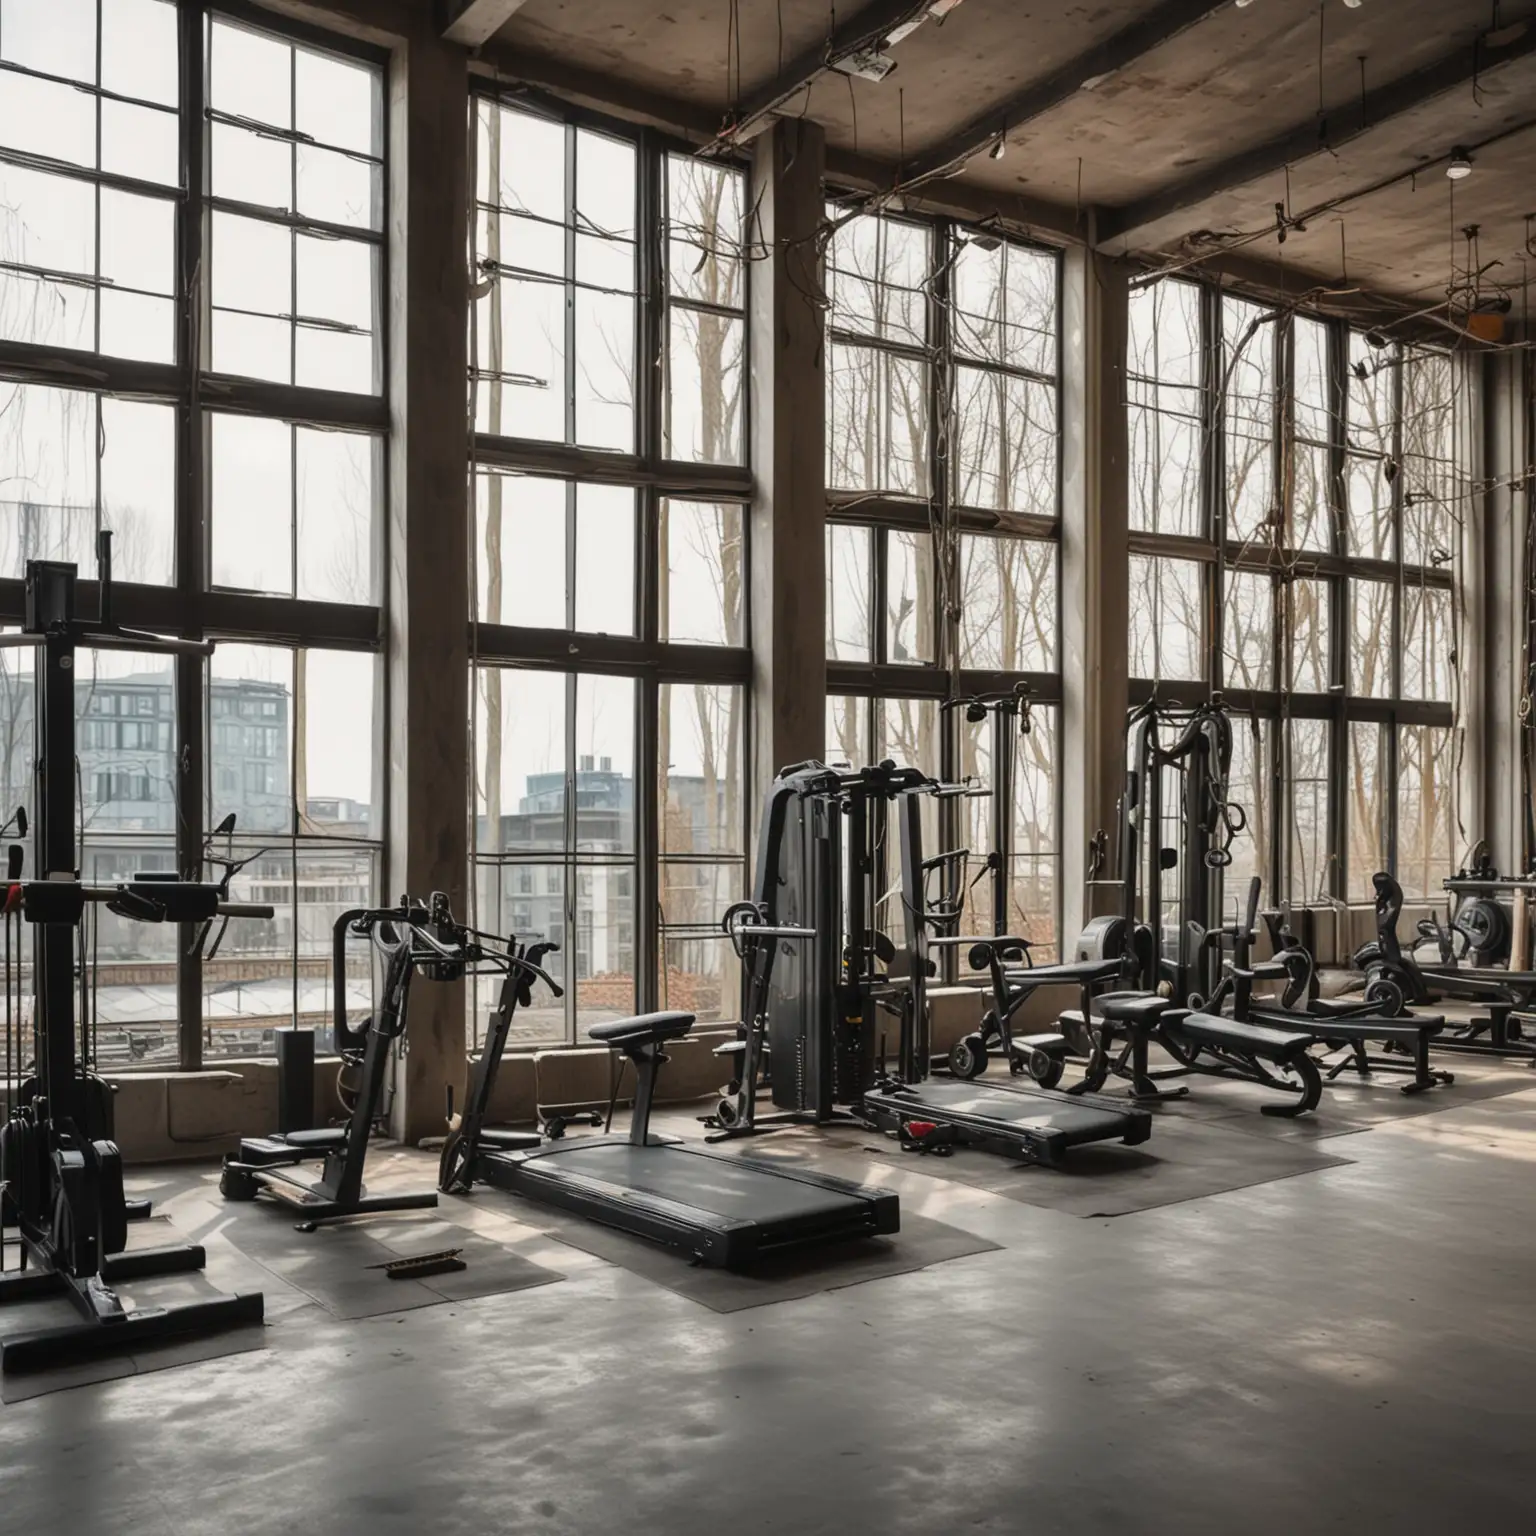 Luxury Fitness Gym with Workout Equipment and Building Windows